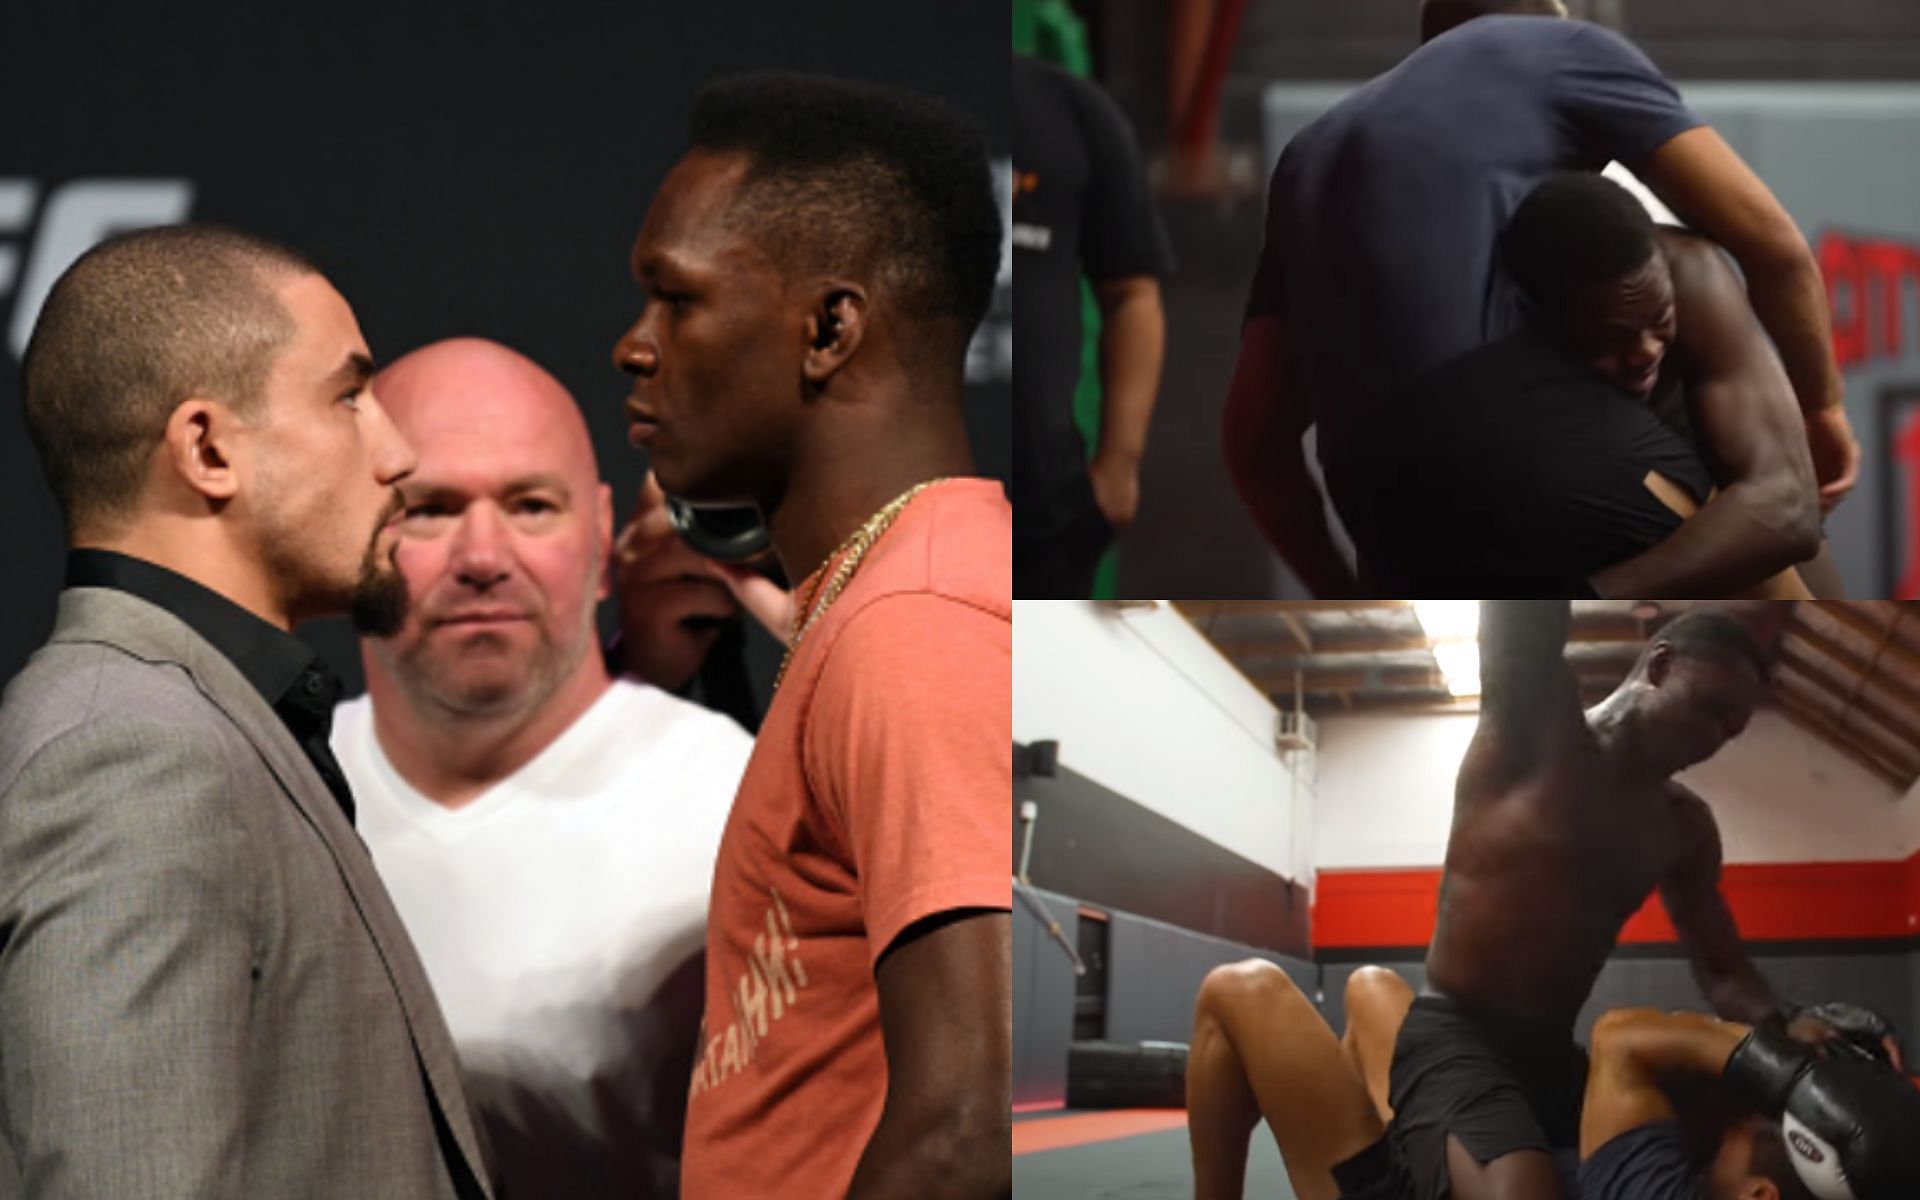 Whittaker vs. Adesanya face-off (left; Image courtesy of Getty); Israel Adesanya&#039;s grappling training (top and bottom right; Images courtesy of &#039;FREESTYLEBENDER&rsquo; YouTube channel)